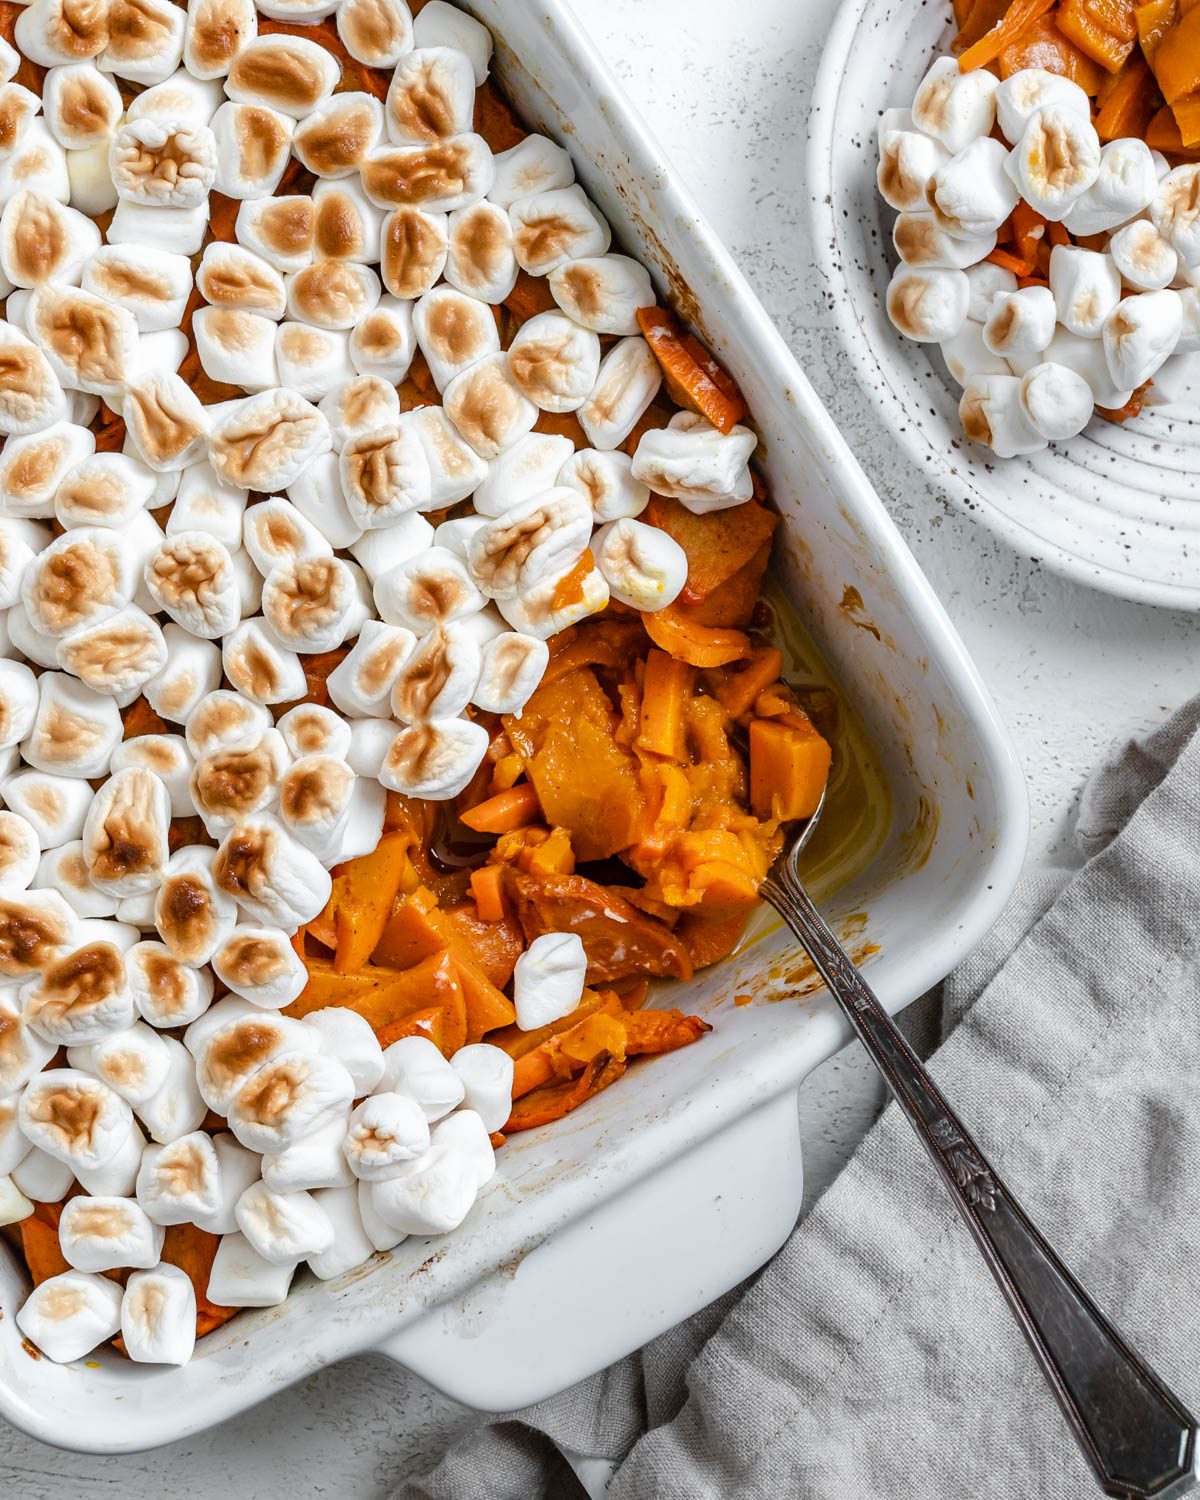 completed Vegan Candied Yams with Marshmallows in a baking dish against a white background